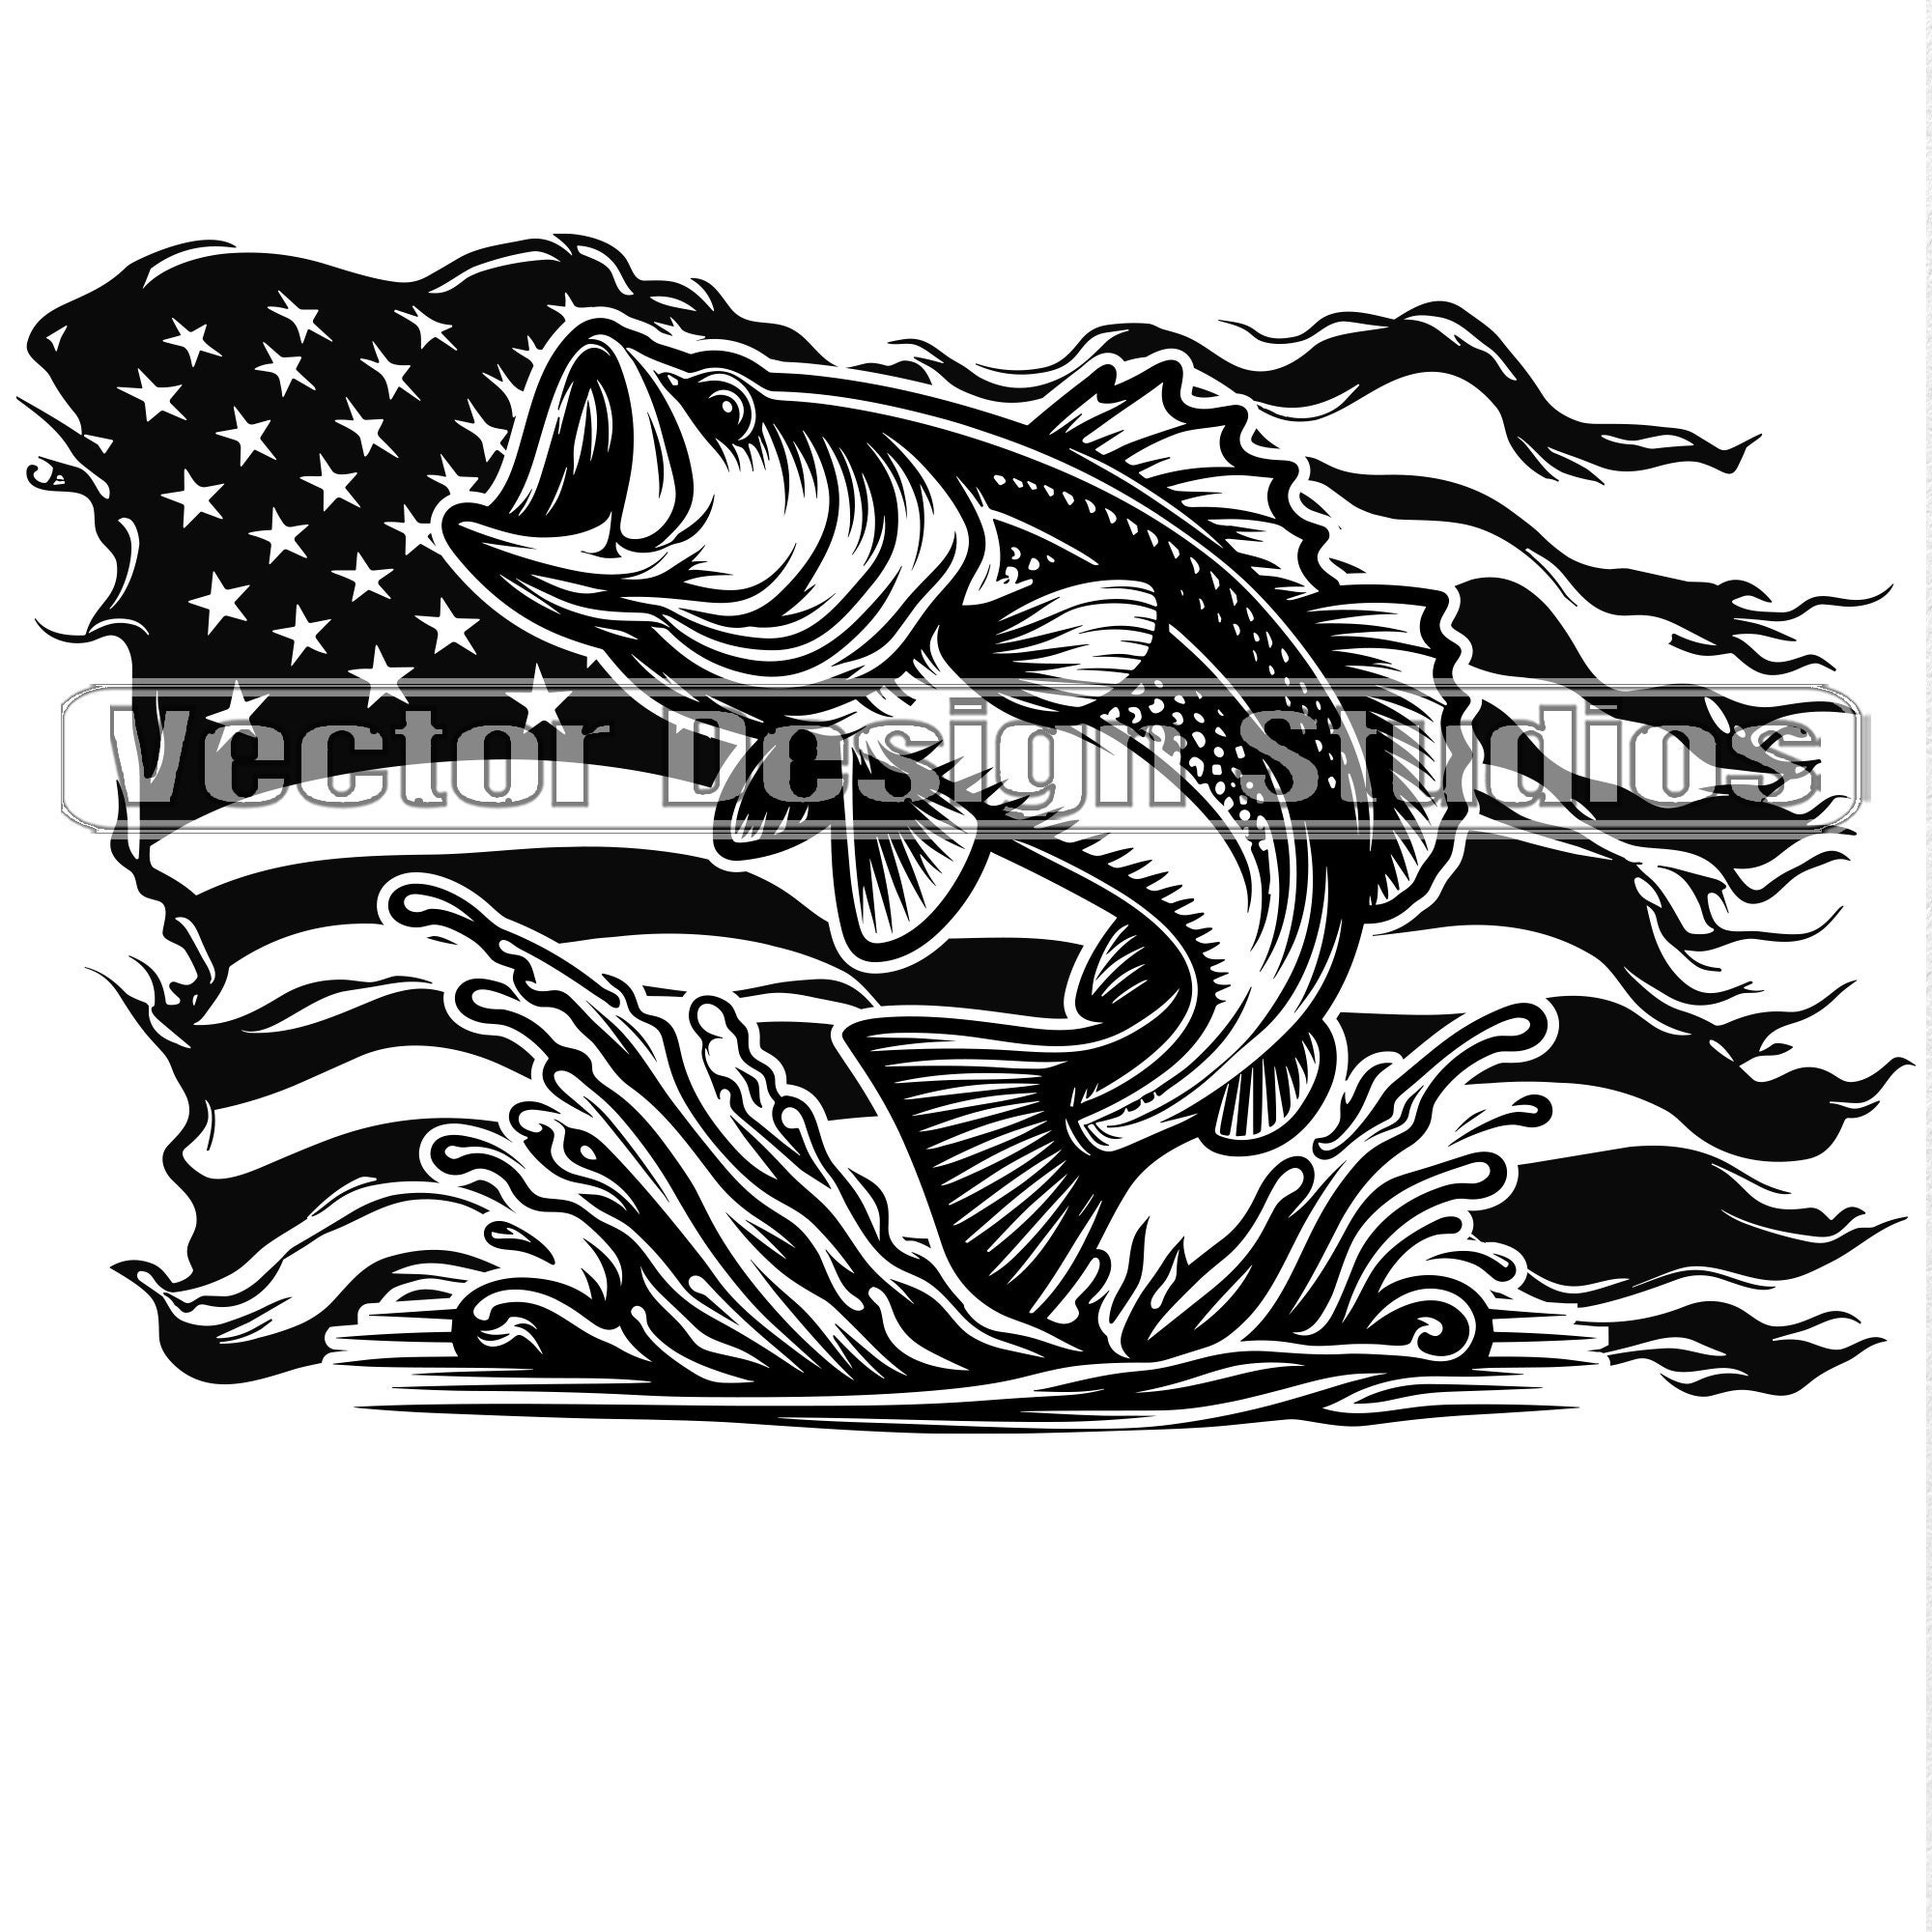 Bass Fishing USA Flag Svg & PNG Files, Bass Fish Clipart, American Flag  Fisherman Silhouette Vector Image, Fish Cut File Digital Download 